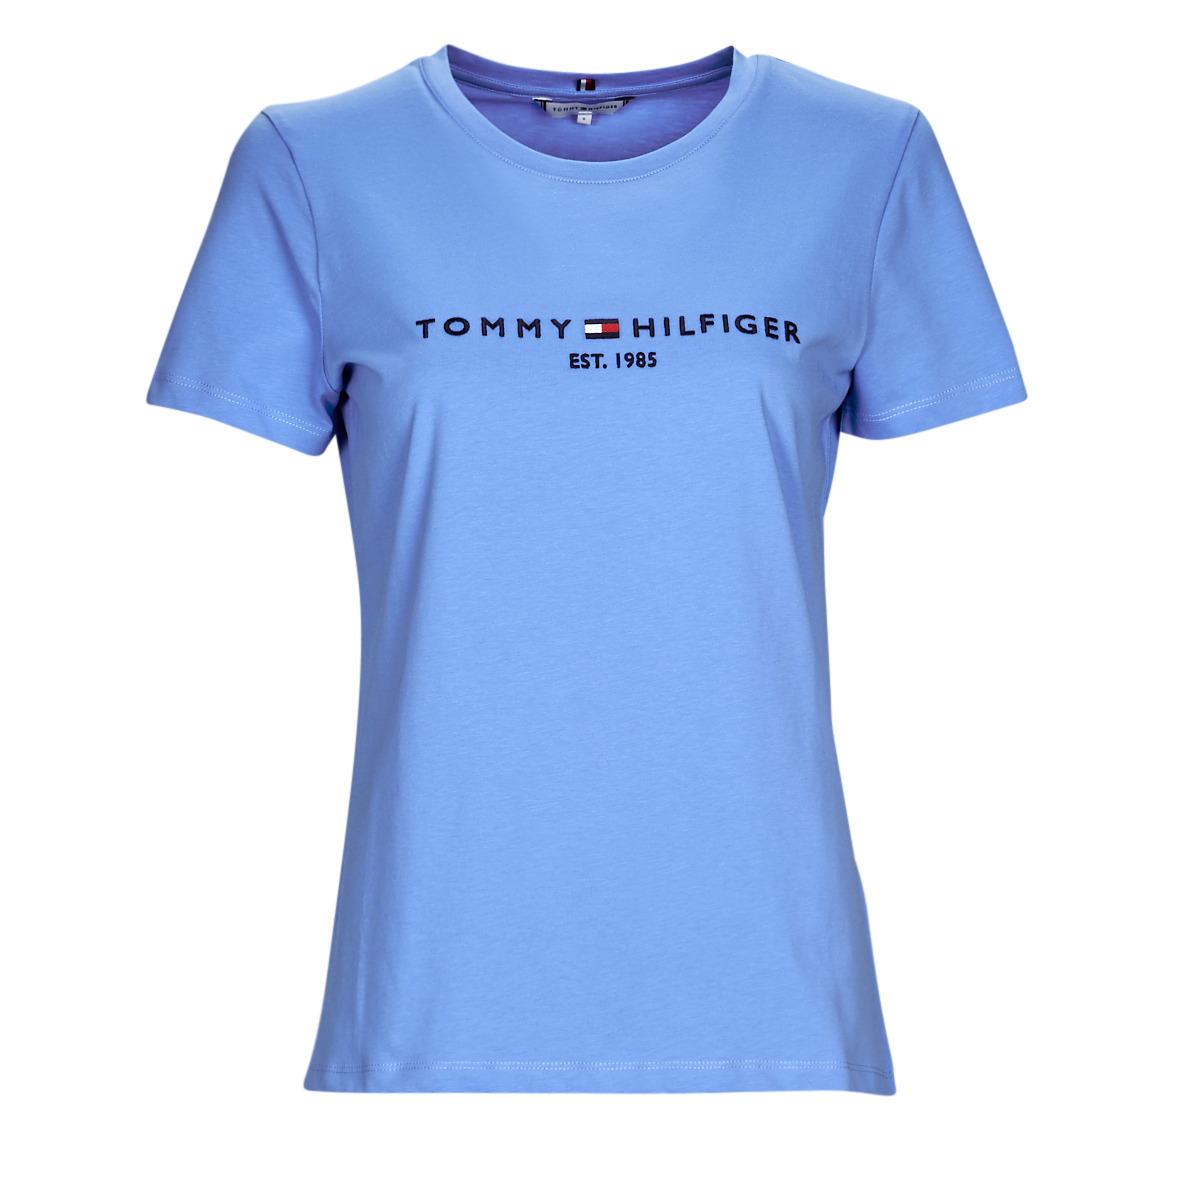 Free ! delivery - Clothing t-shirts NET Women SS short-sleeved HILFIGER Tommy Spartoo C-NK REGULAR Hilfiger - Blue | TEE